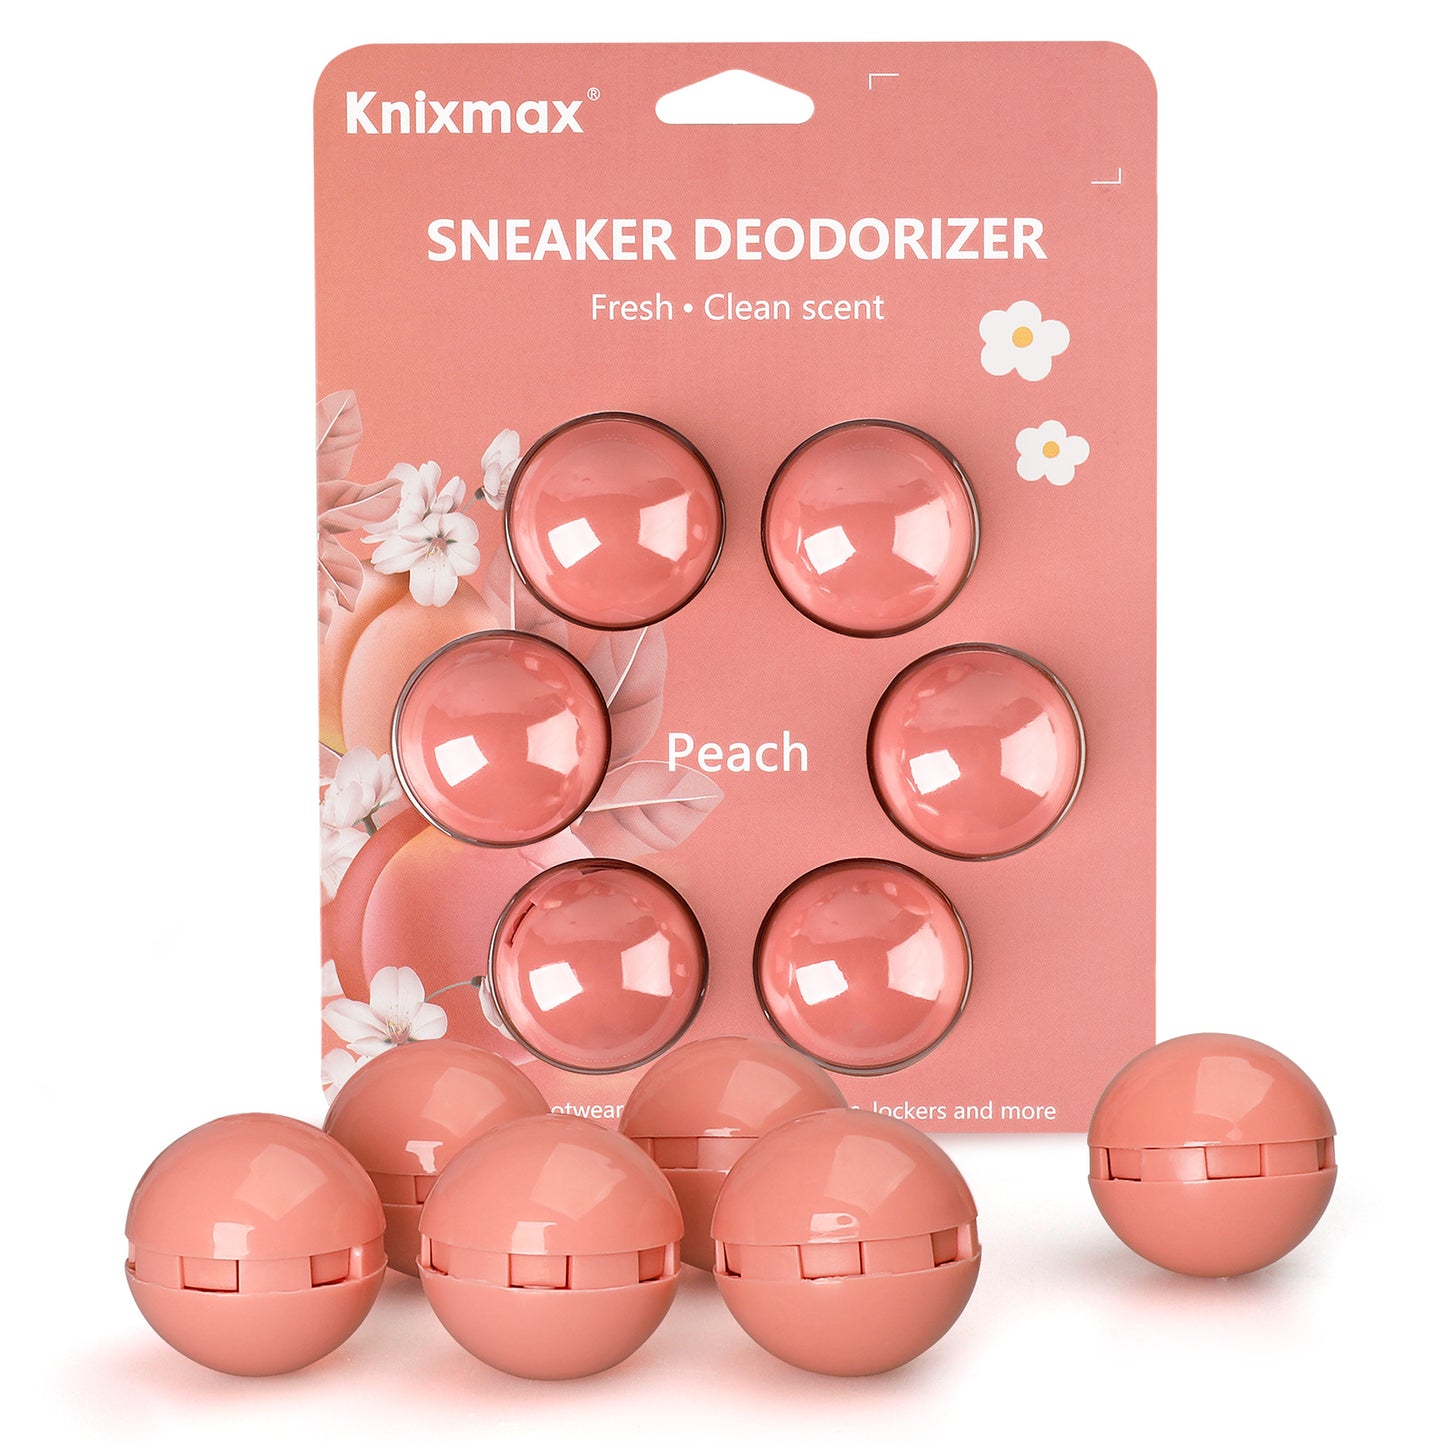 Knixmax Outdoor Car Fresheners Deodrant Eliminate Odours and Release Fresh Flavours Six Ball Pack/Peach Flavor/Pink